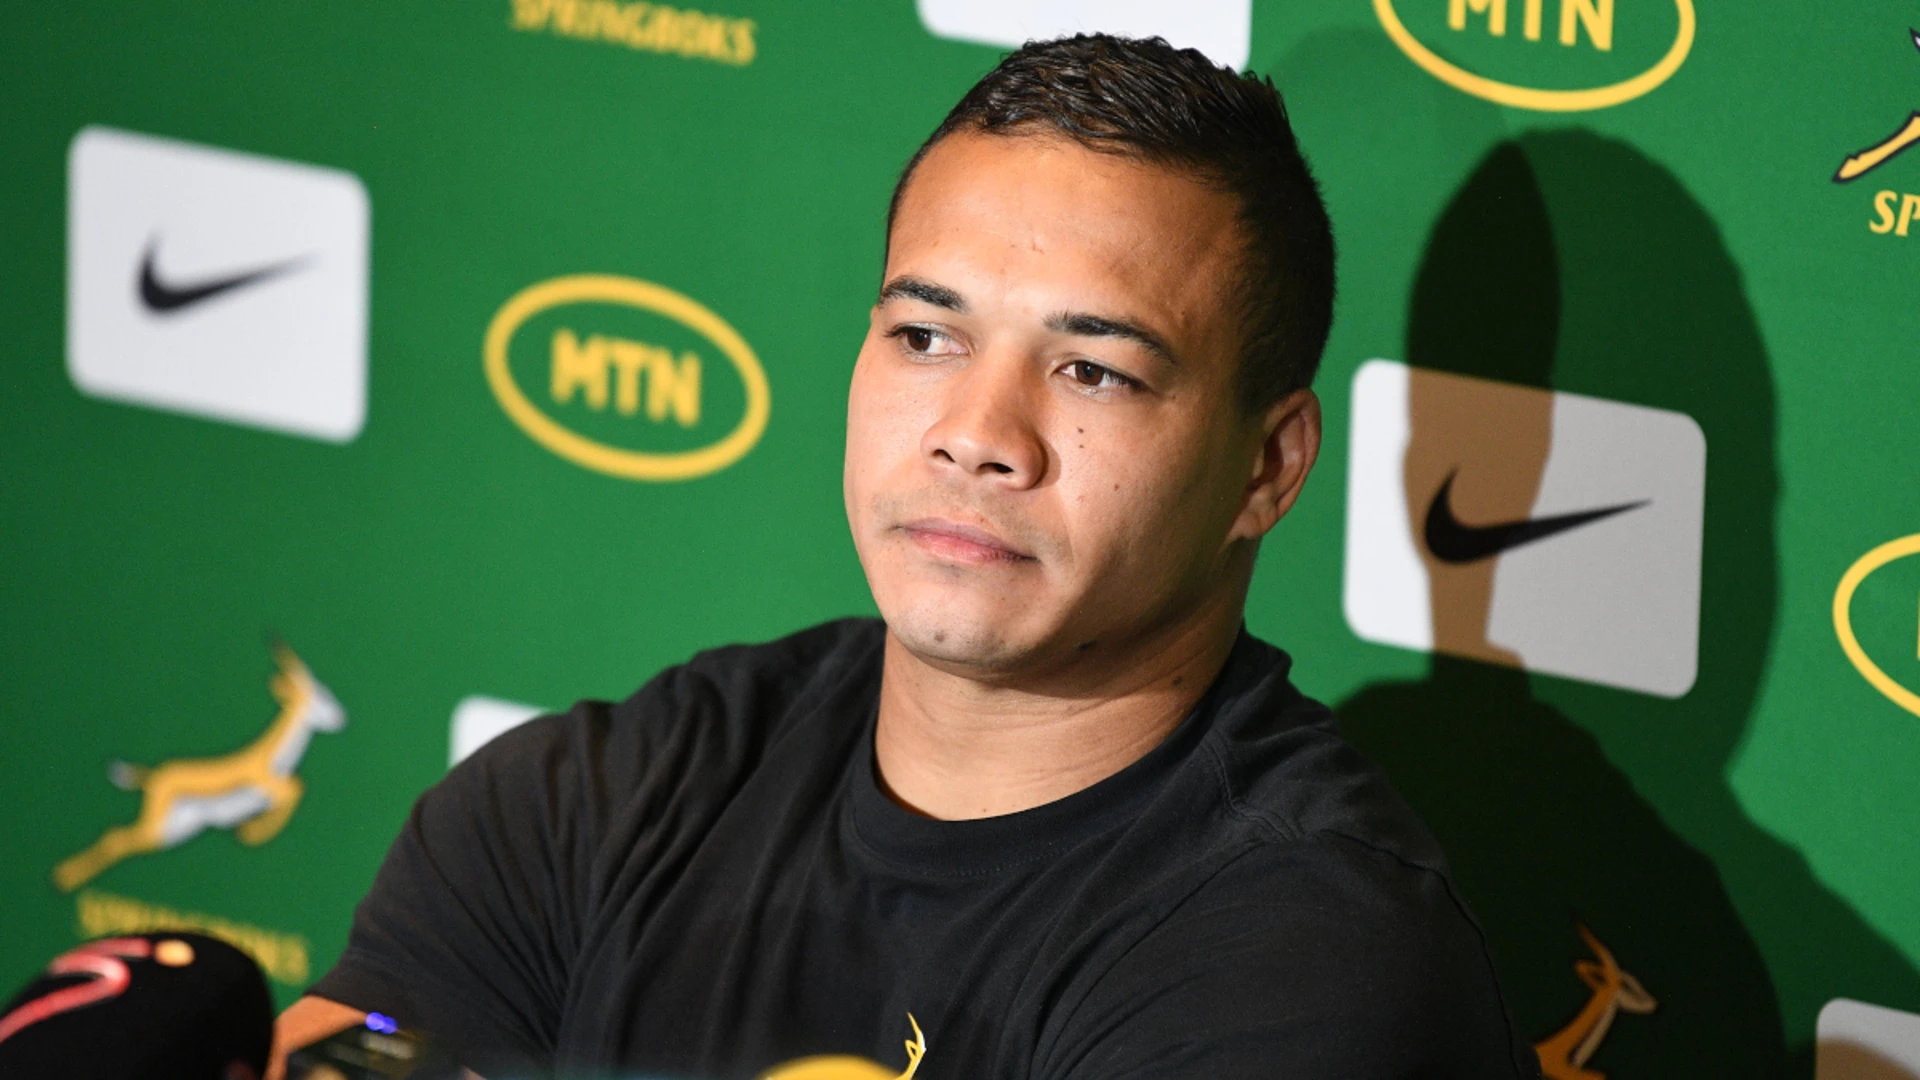 NO EGOS: "Nobody walks around thinking they are "the men" and have achieved everything - Cheslin